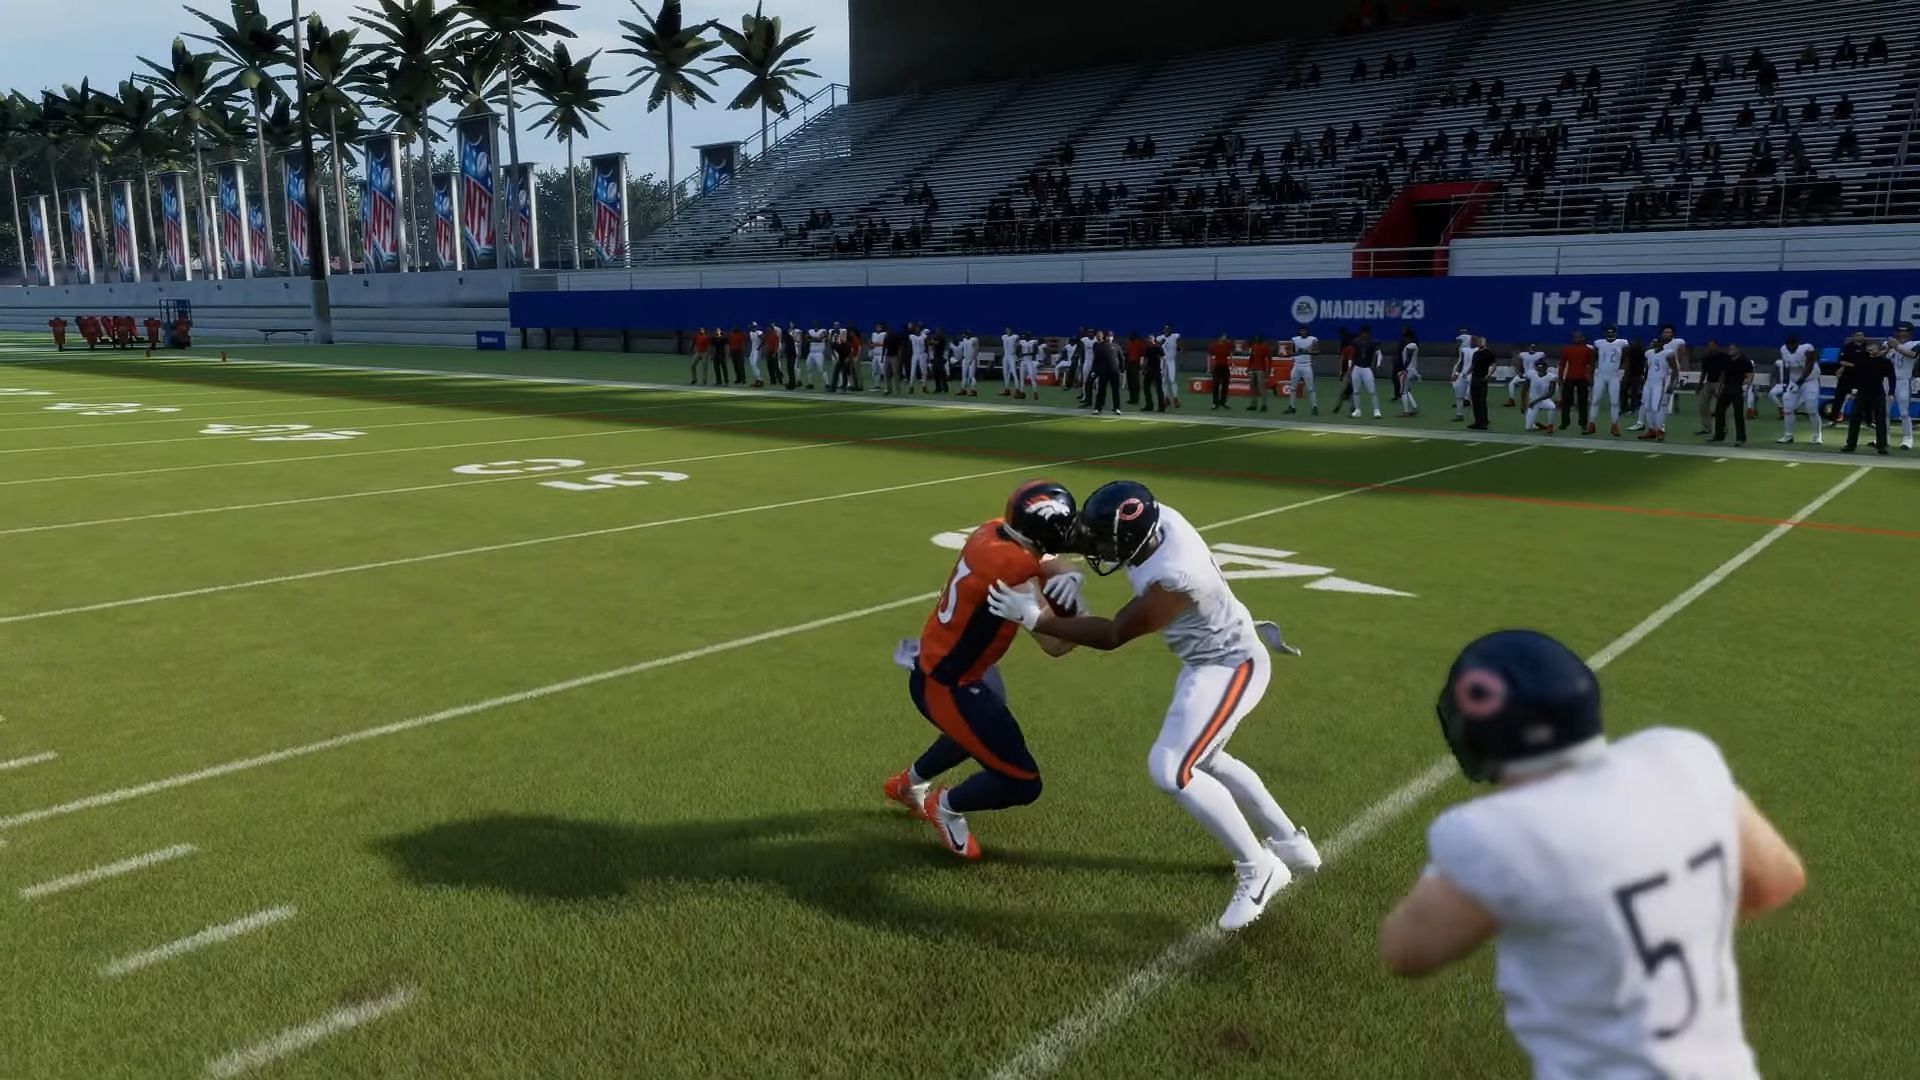 Tackling opponents to strip the ball is essential to turn the tide of the game (Image via Youtube/WAYNE6578)